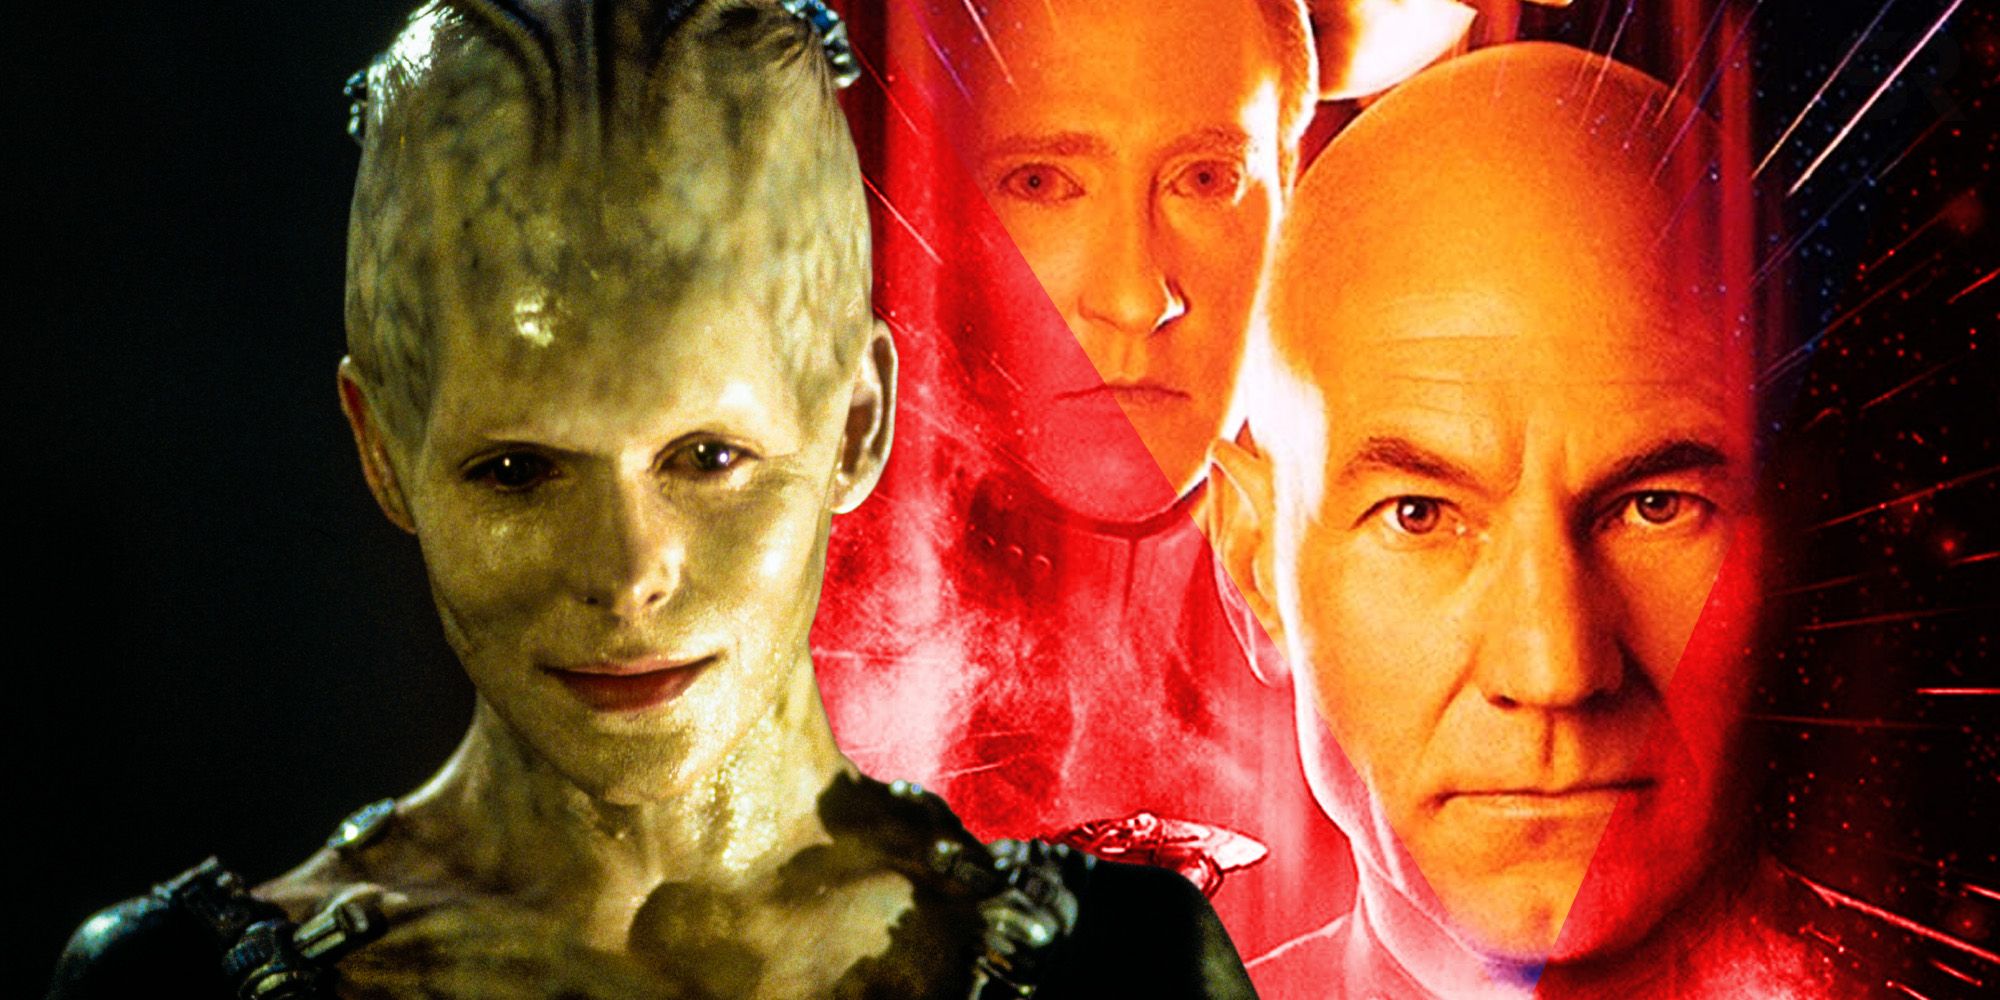 The Borg queen, Data and Captain Picard in Star trek First Contact